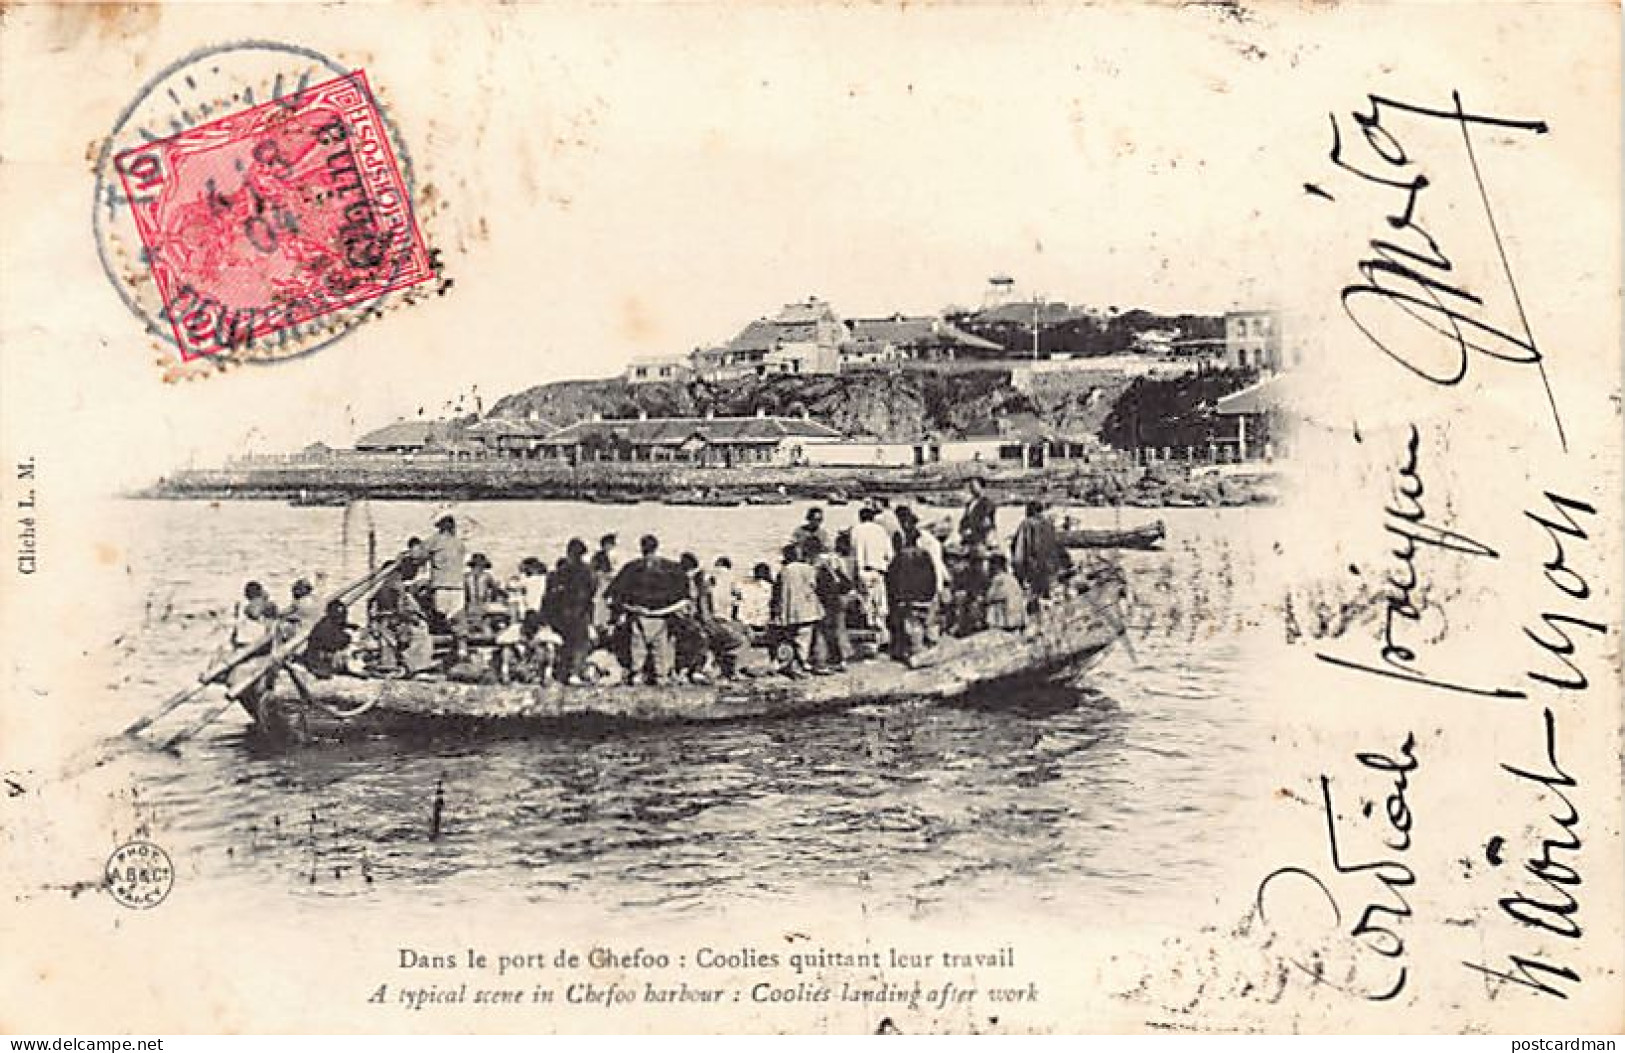 China - YANTAI Chefoo - Coolies Landing After Work - SEE STAMP AND POSTMARK - Publ. L.M. - China